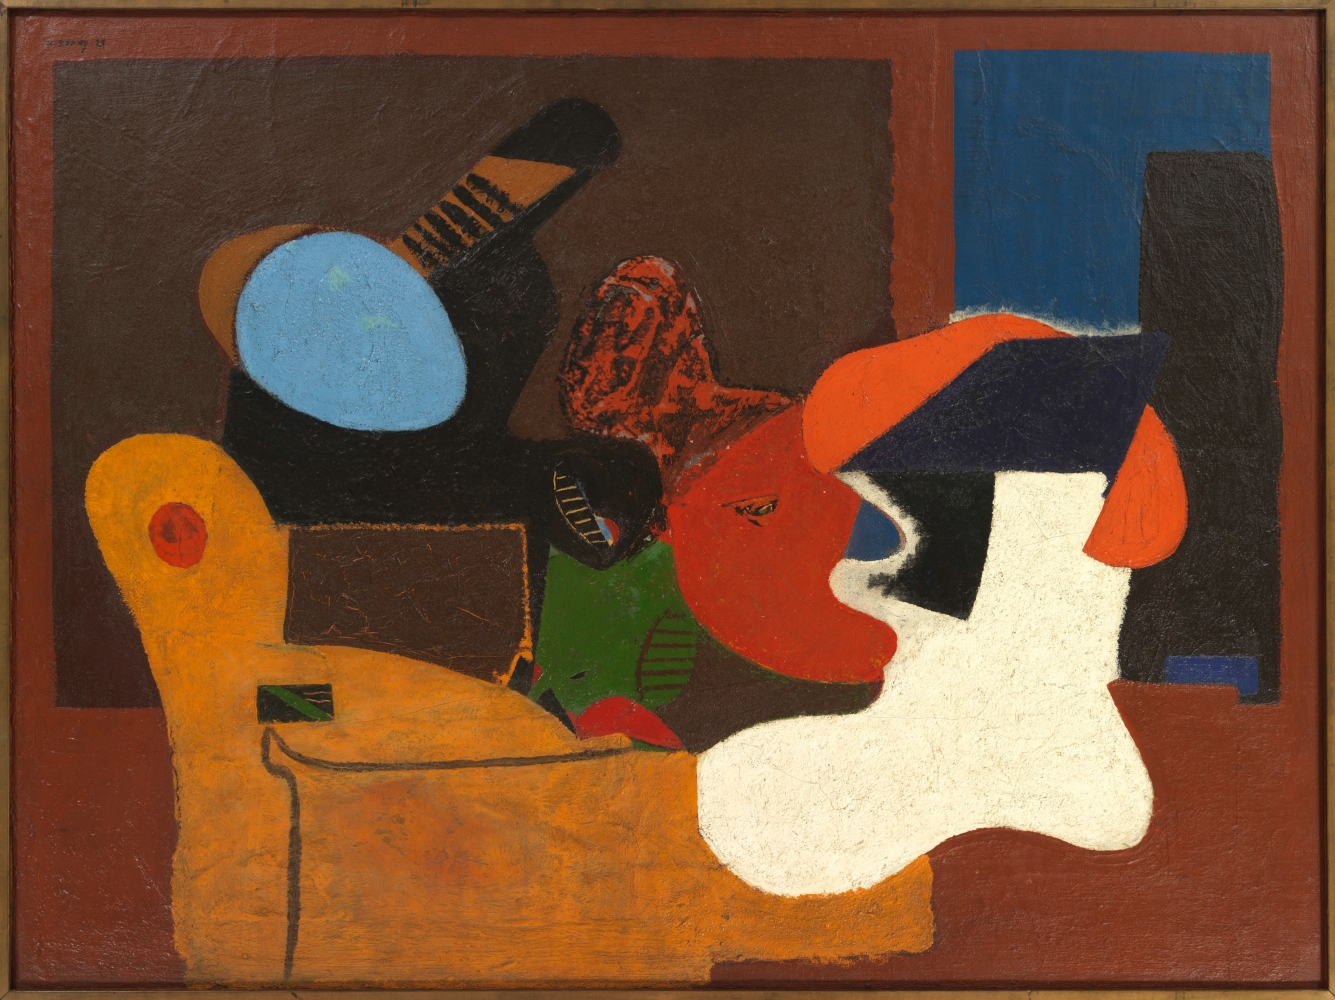 Still Life,&nbsp;1929, oil on canvas,&nbsp;36 1/4 x 48 1/8 in. (92.1 x 122.2 cm). Private collection. [AGCR: P073]